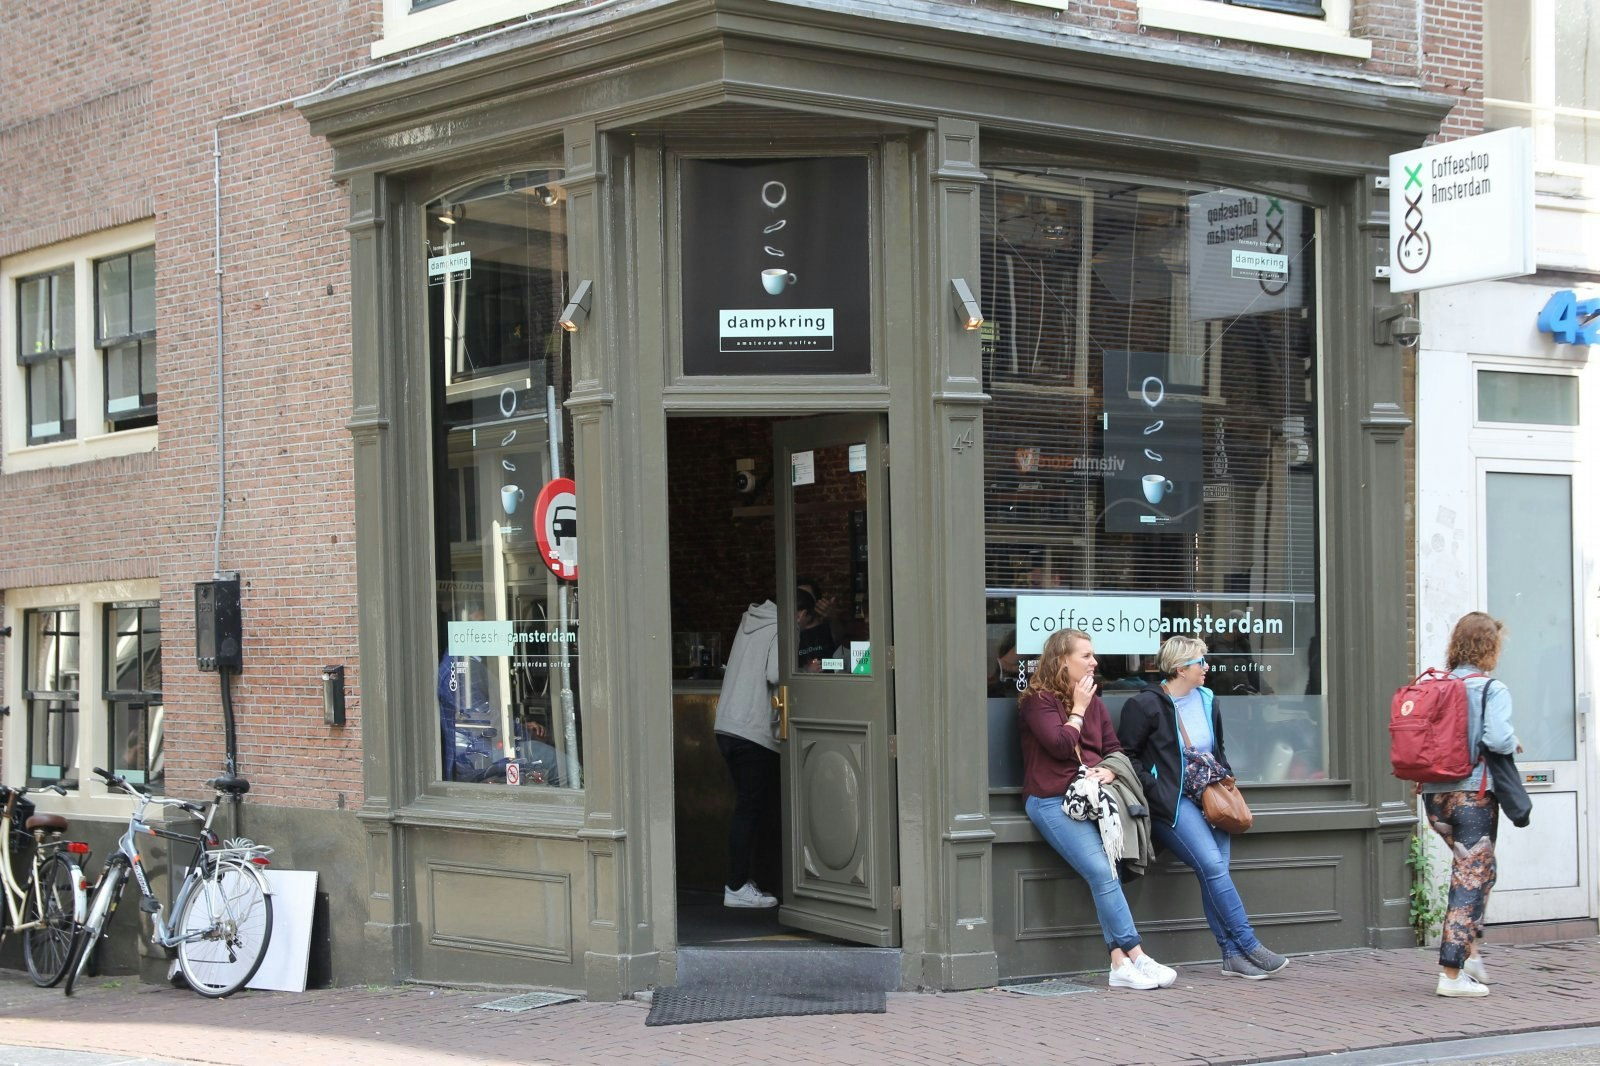 The exterior of Coffeeshop Amsterdam which is painted a dark khaki. The large windows feature the shops logos and are obscured by blinds. Two women are leaning against the window ledge outside the shop. 